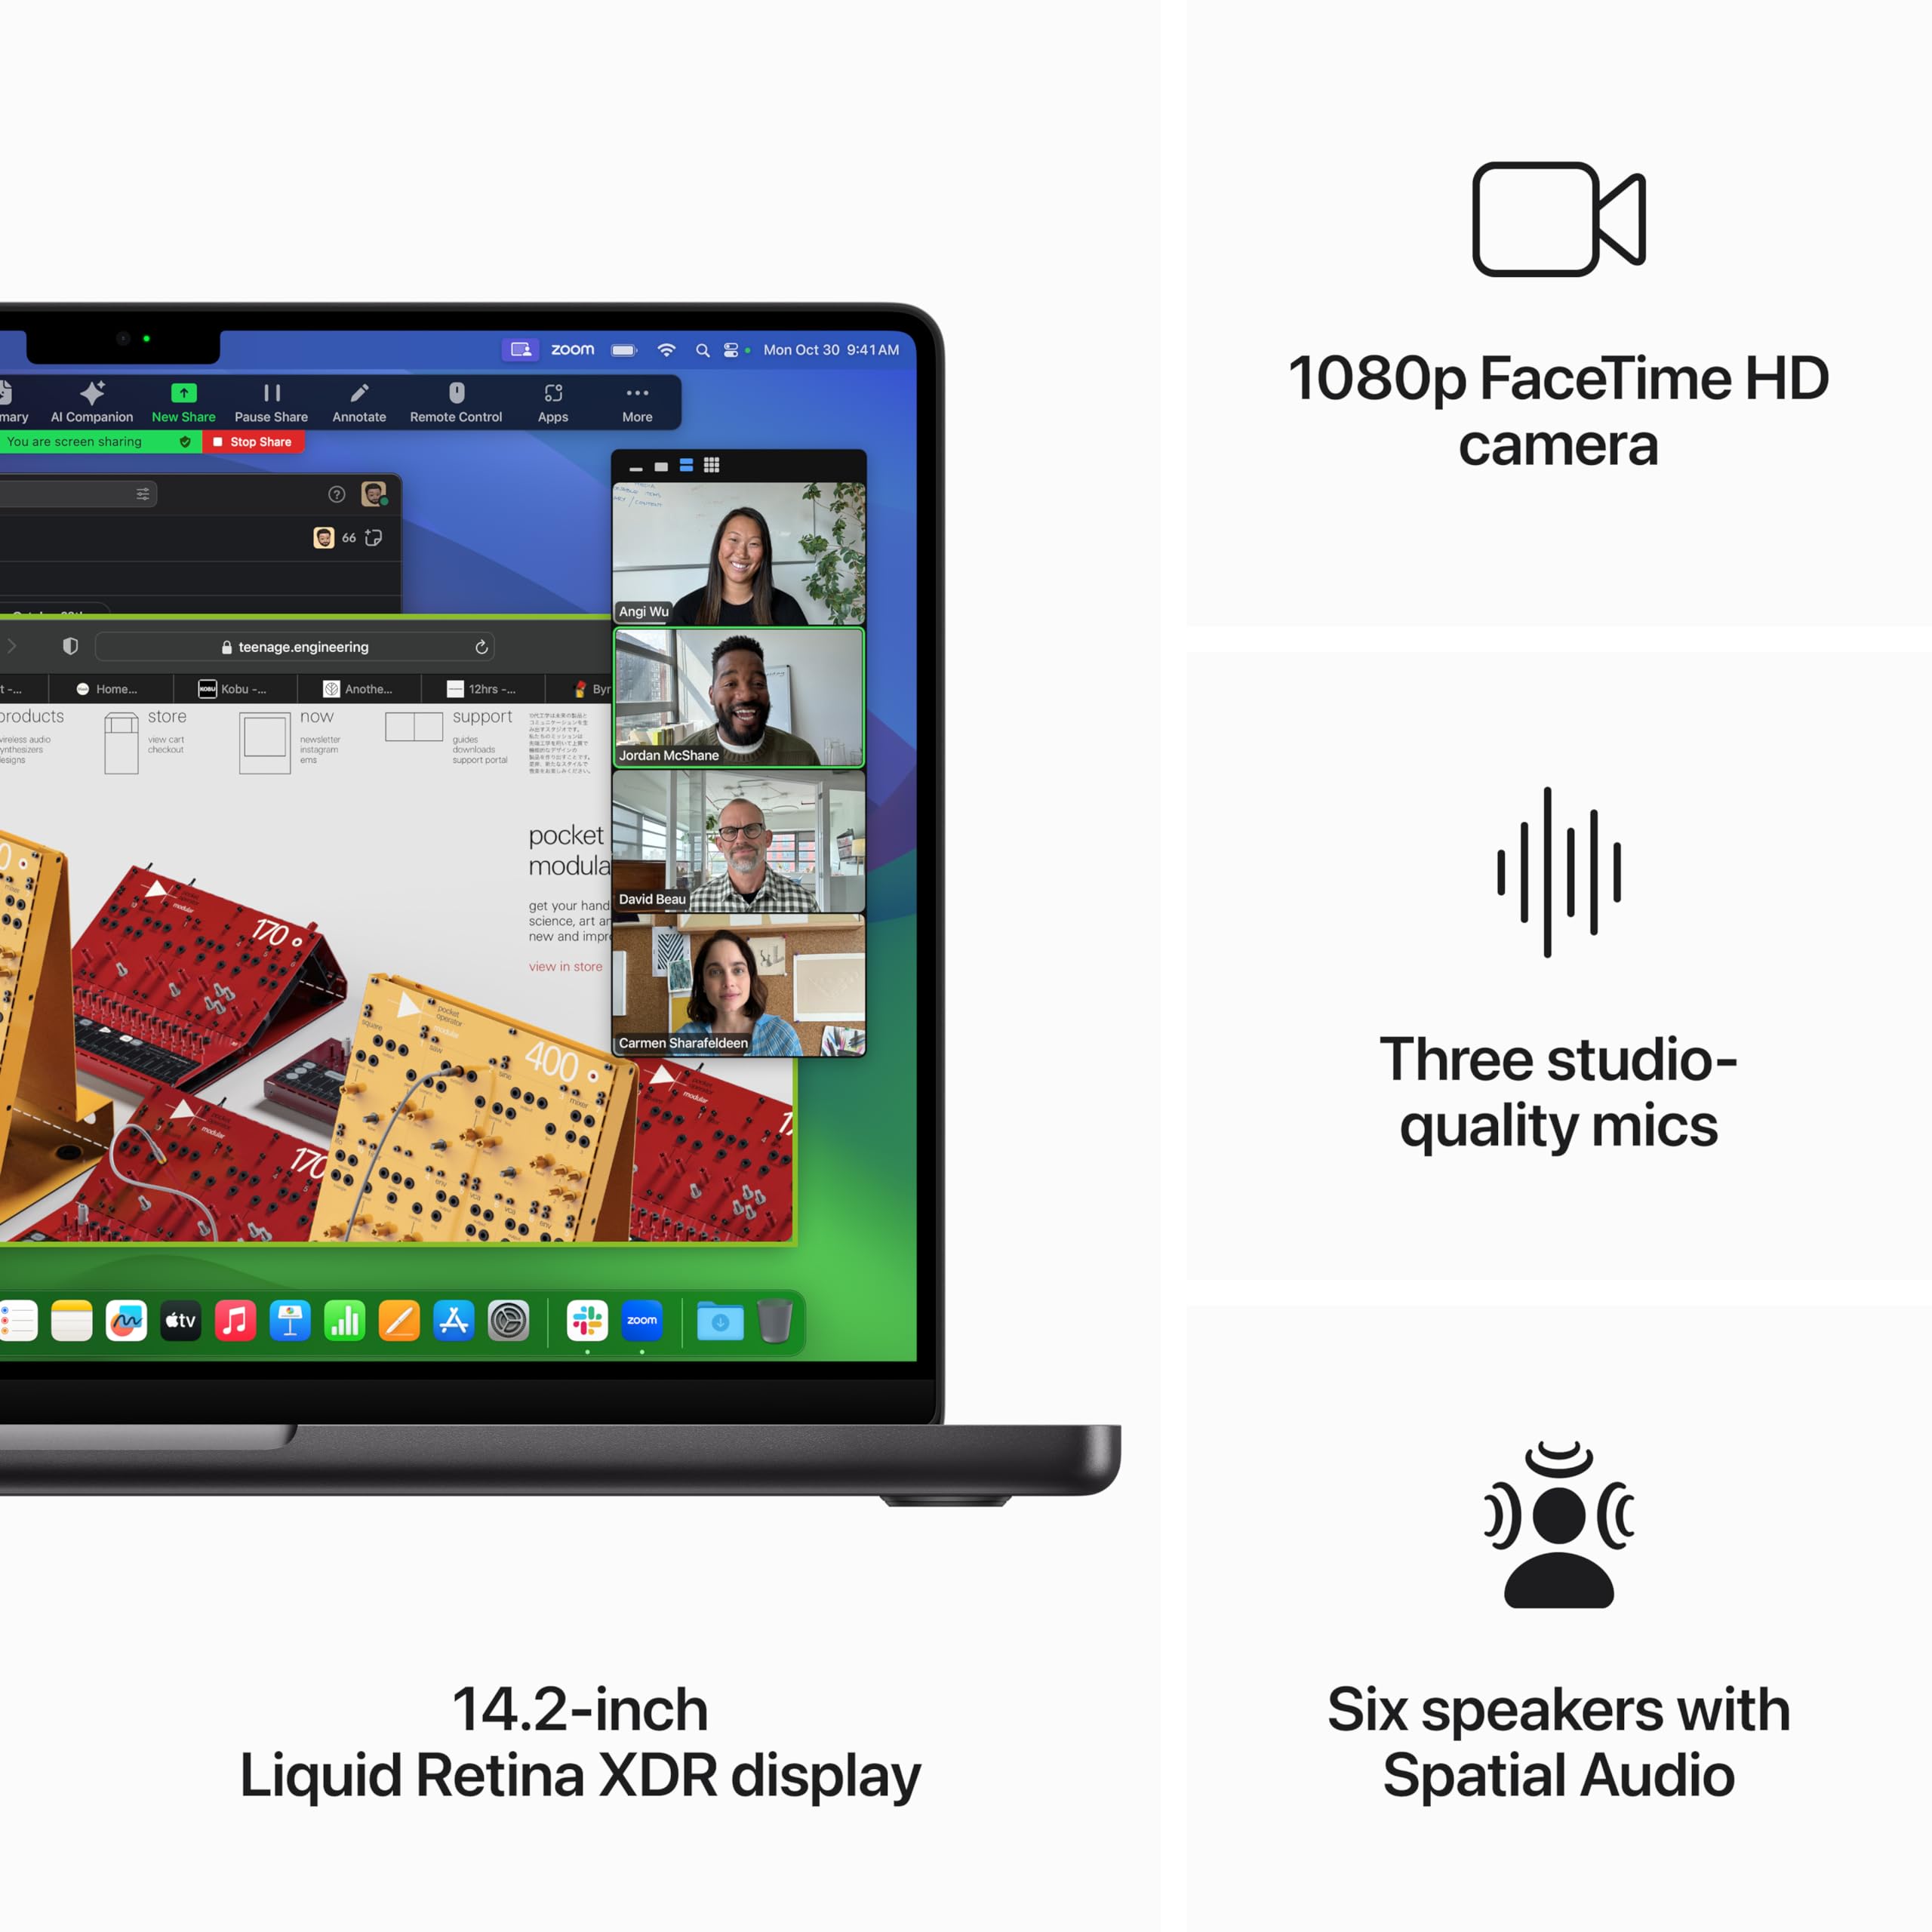 Apple 2023 MacBook Pro Laptop M3 Max chip with 14‑core CPU, 30‑core GPU: 14.2-inch Liquid Retina XDR Display, 36GB Unified Memory, 1TB SSD Storage. Works with iPhone/iPad; Space Black